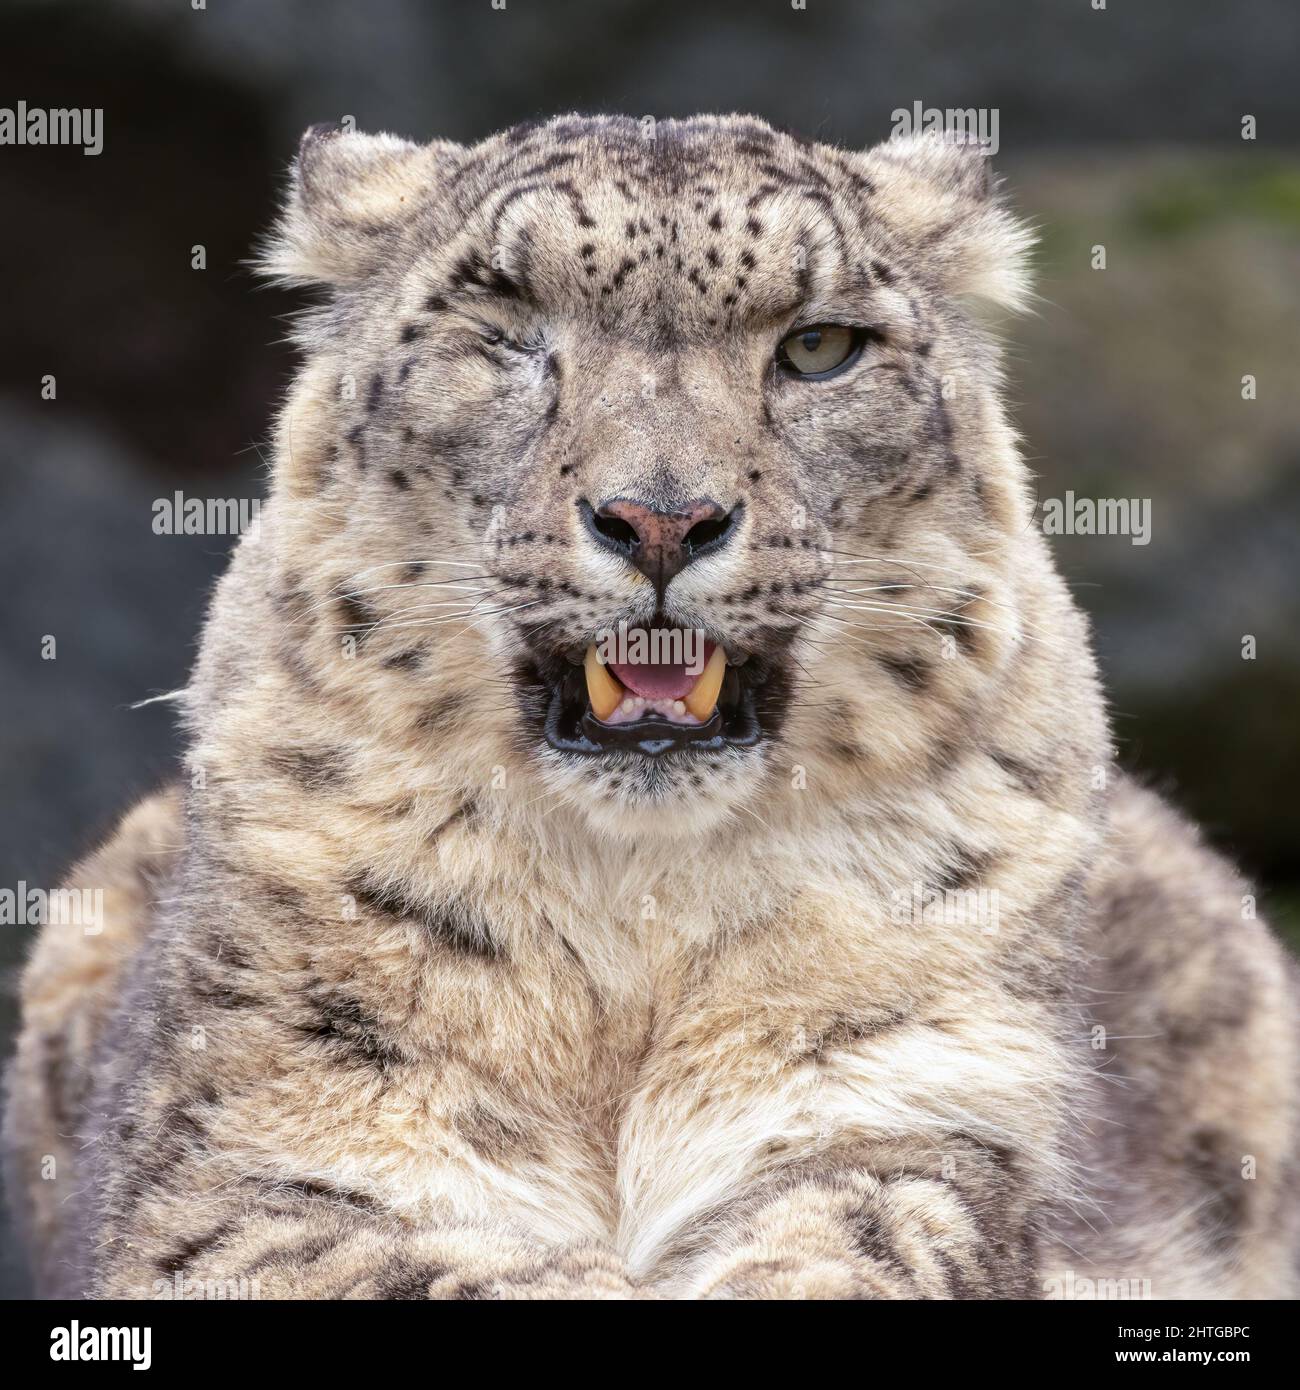 Snow Leopard or Ounce (Panthera uncia) portrait. Beautiful big cat baring its fangs. Stock Photo